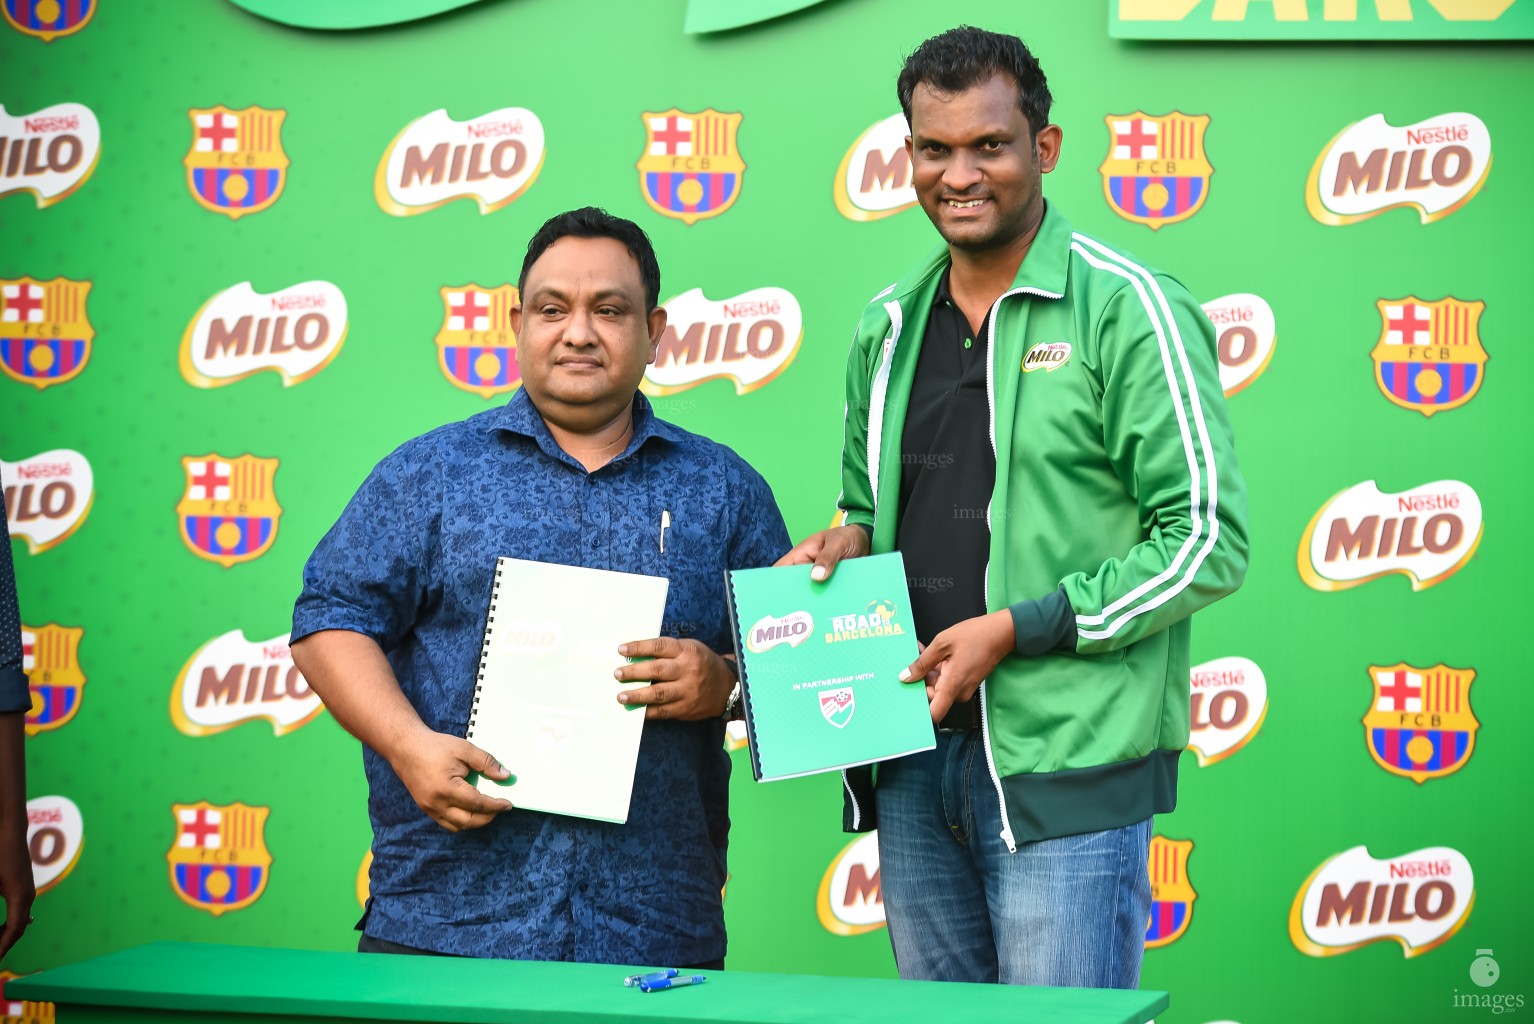 Official Launching of MILO Road To Barcelona